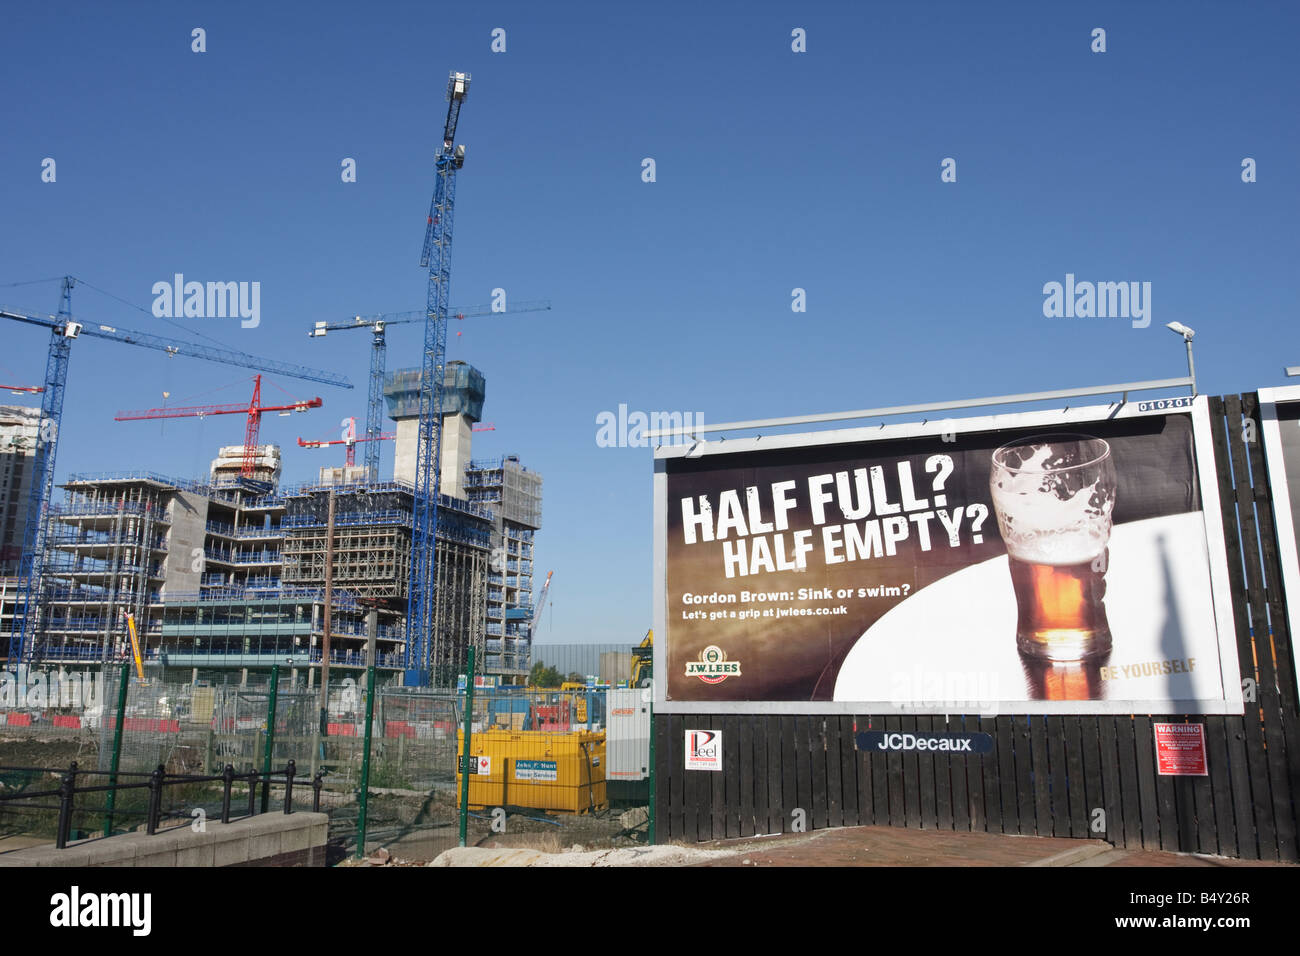 Half Full Half Empty Advertising Poster next to a Construction Site Economic Climate Stock Photo